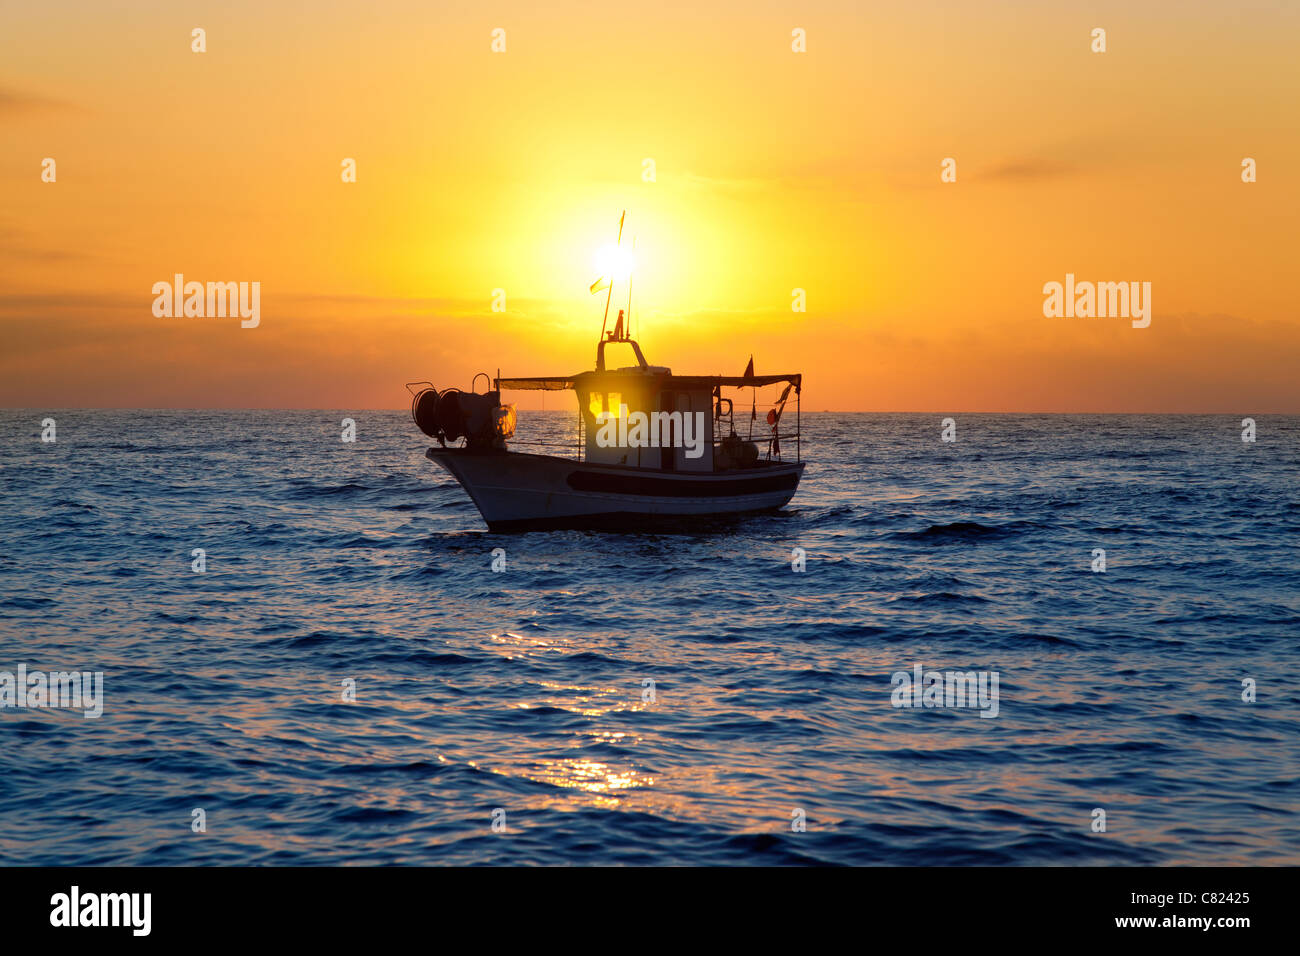 fishing boat in sunrise at Mediterranean sea traditional fishery Stock Photo